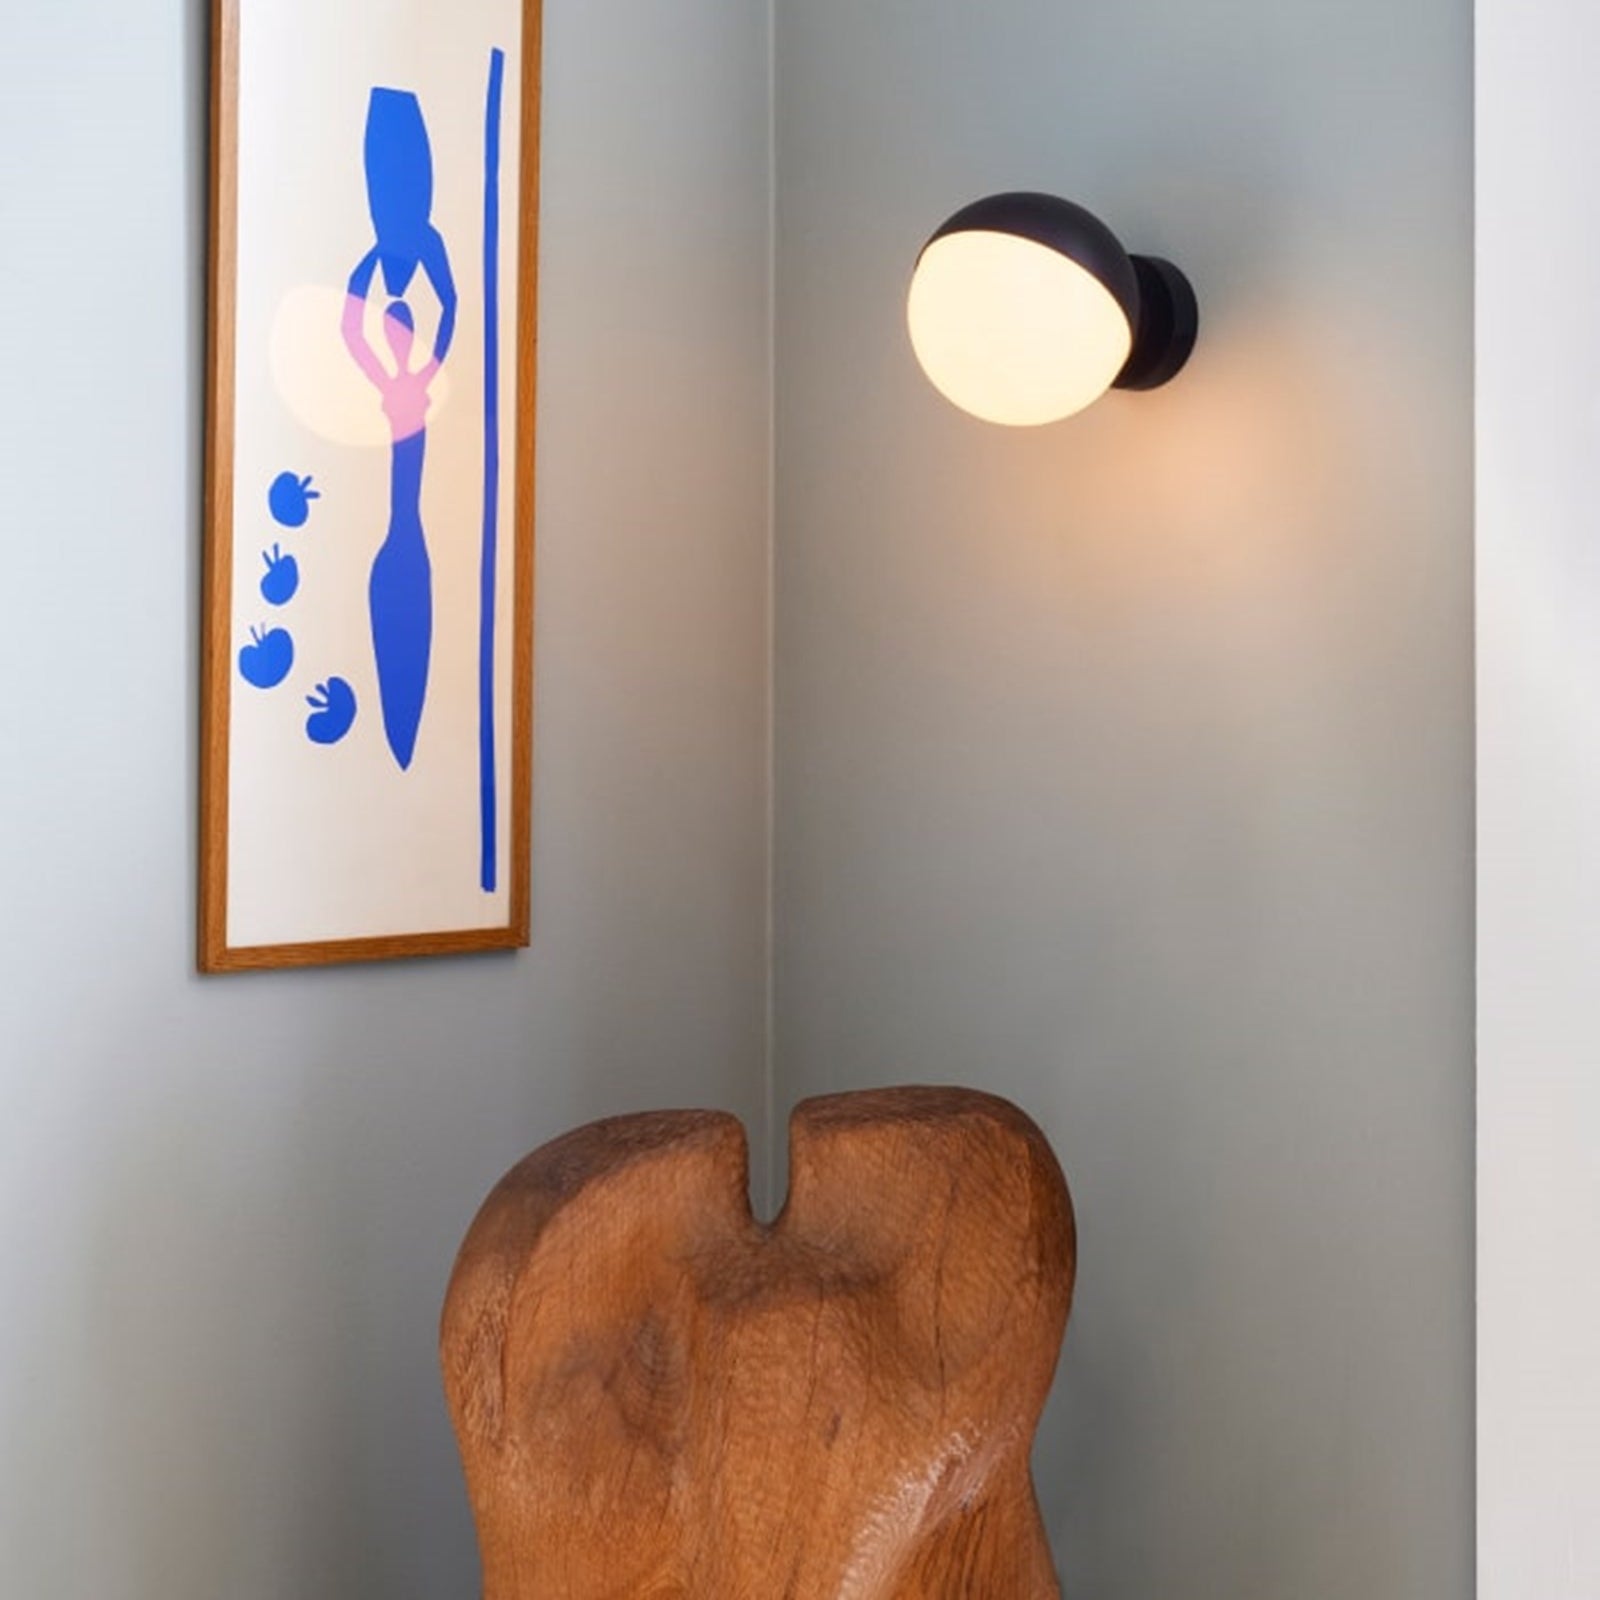 The VL Studio Wall light by Louis Poulsen emits a glare-free, diffused light. The triple-layered opal glass provides a pleasant and uniform illumination of the area around the fixture. The lamp shade can be tilted 90 degrees to the right or left, which allows for flexible light distribution.